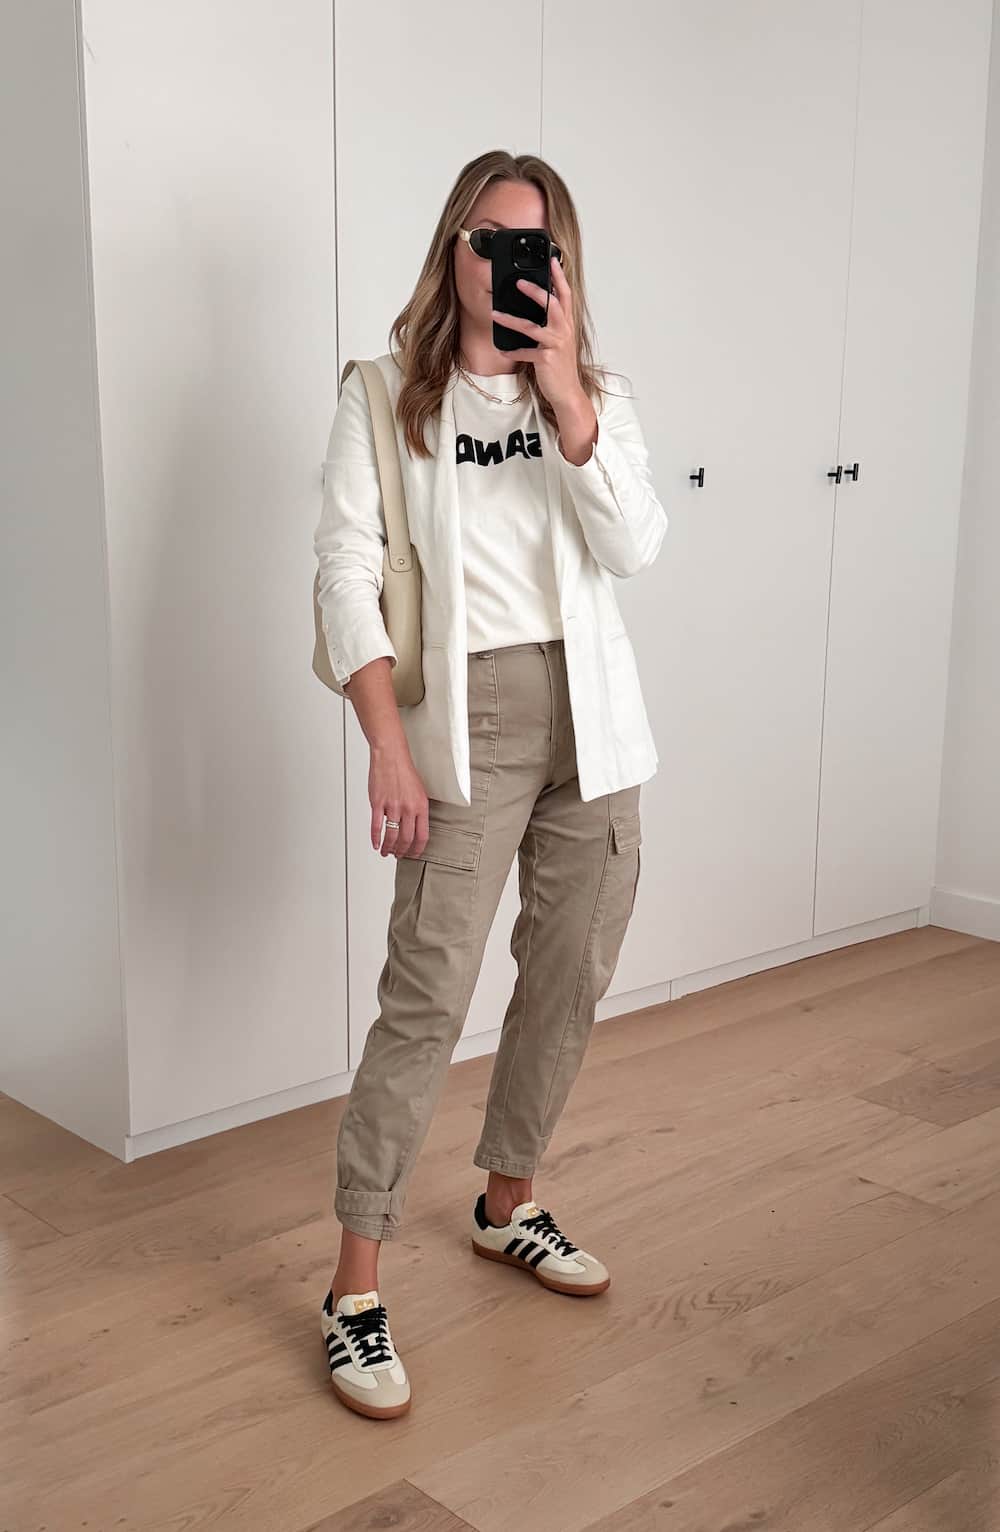 Christal wearing cargo pants, sneakers, a graphic tee and a white blazer.